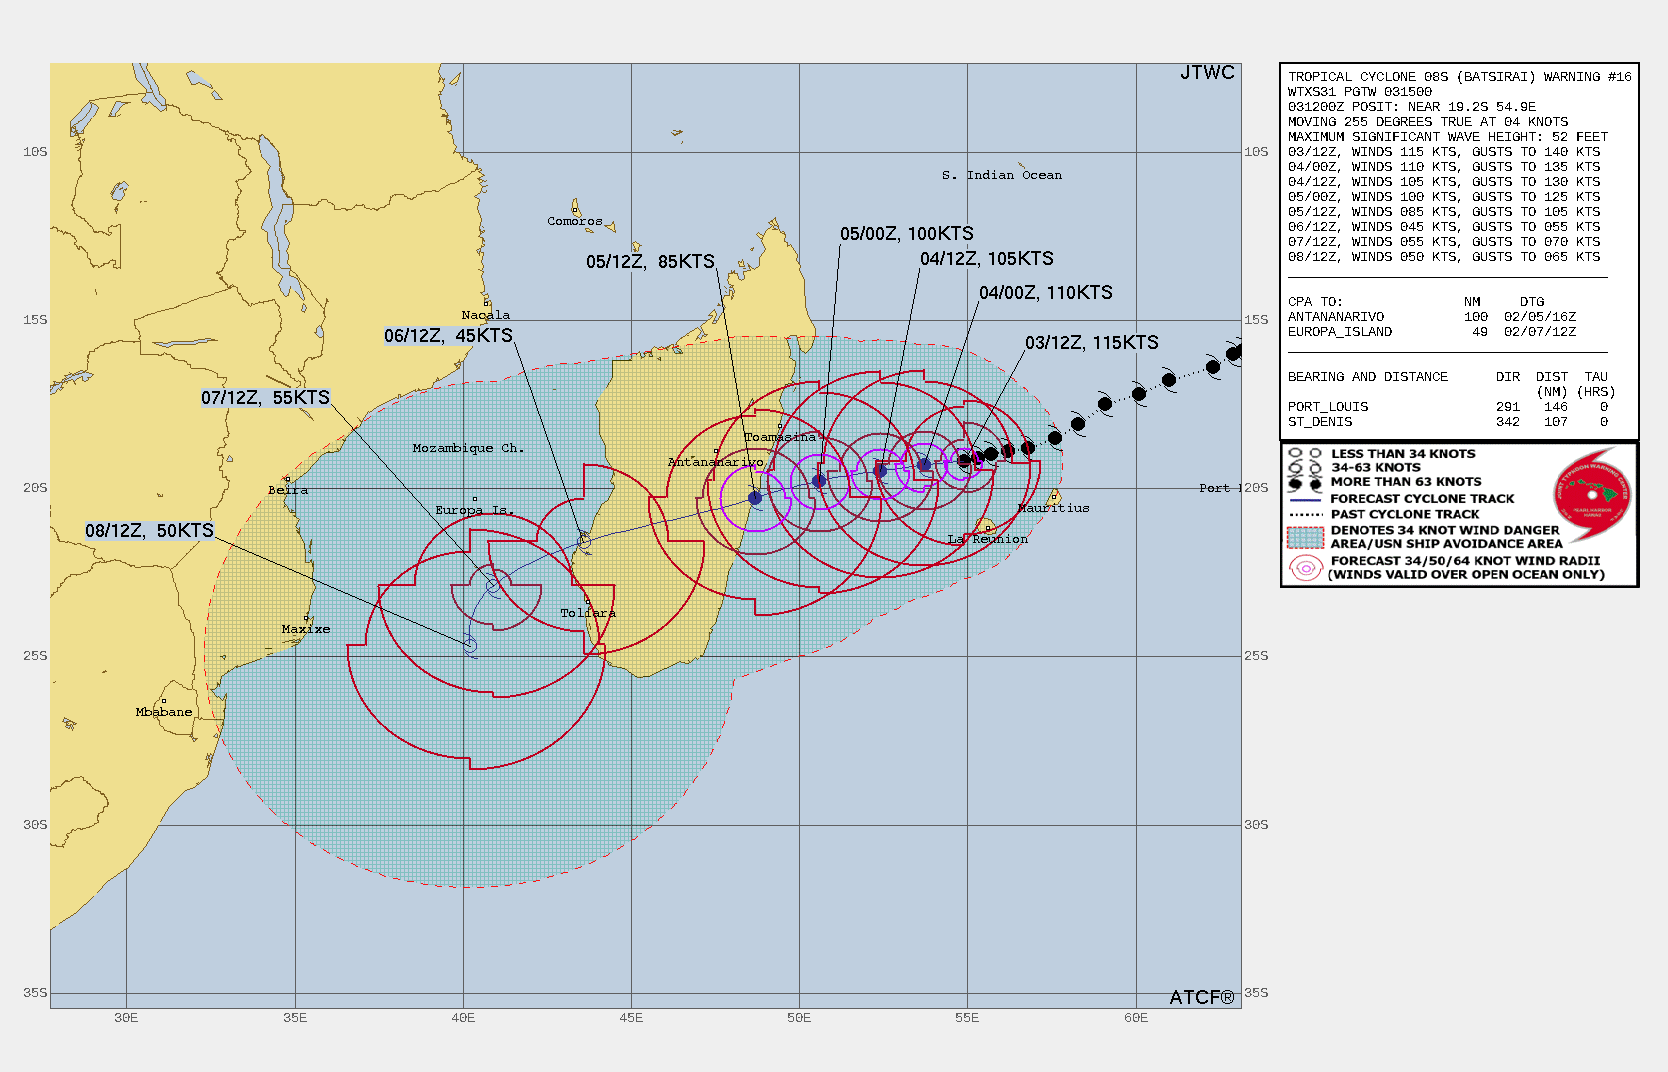 FORECAST REASONING.  SIGNIFICANT FORECAST CHANGES: THERE ARE NO SIGNIFICANT CHANGES TO THE FORECAST FROM THE PREVIOUS WARNING.  FORECAST DISCUSSION: TC BATSIRAI WILL CONTINUE ON ITS CURRENT TRACK UNDER THE STEERING INFLUENCE OF THE SUBTROPICAL RIDGE (STR), MAKING LANDFALL OVER CENTRAL MADAGASCAR AROUND 48H, CROSS THE ISLAND, AND EXIT INTO THE MOZAMBIQUE CHANNEL JUST AFTER 72H. AFTERWARD, IT WILL ROUND THE WESTERN EDGE OF THE STR AND TRACK SOUTHWARD. THE MARGINALLY UNFAVORABLE ENVIRONMENT WILL SLOWLY ERODE THE SYSTEM DOWN TO 85KTS BY 48H. AFTERWARD, LAND INTERACTION WILL RAPIDLY ERODE IT DOWN TO 45KTS AS IT EXITS INTO THE MOZAMBIQUE CHANNEL. THE WARM SST IN THE CHANNEL WILL FUEL A MODEST INTENSIFICATION TO 55KTS BY 96H; AFTERWARD, INCREASING VWS WILL WEAKEN IT TO 50KTS BY 120H.